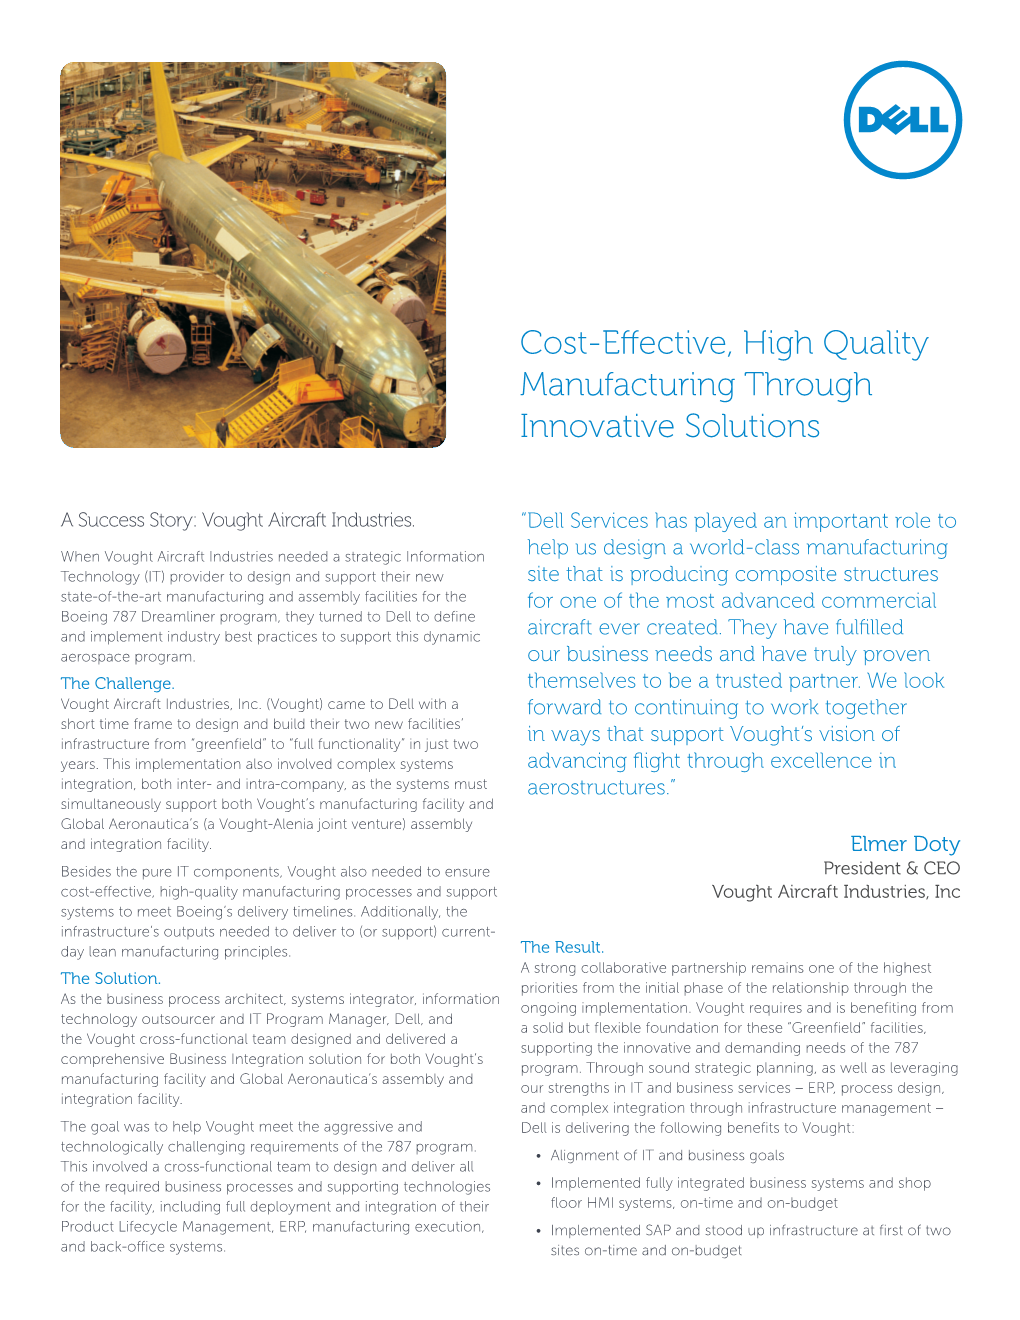 Cost-Effective, High Quality Manufacturing Through Innovative